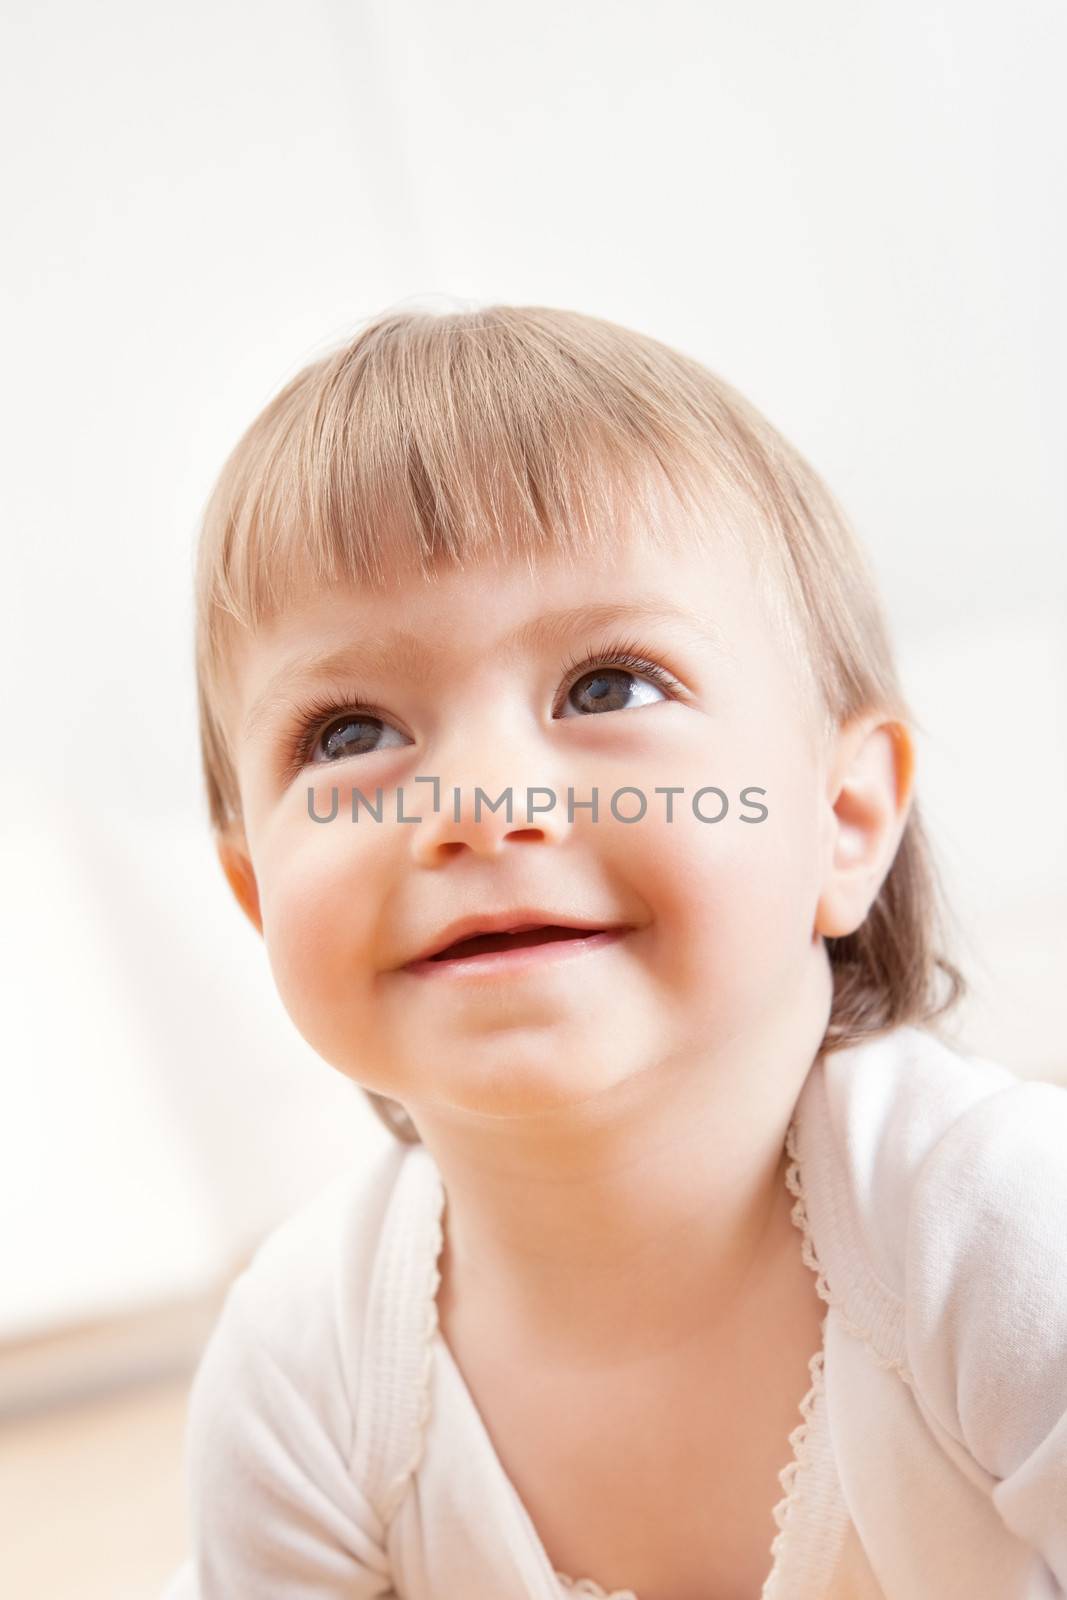 Low angle portrait of a cute innocent young baby smiling and looking up with love